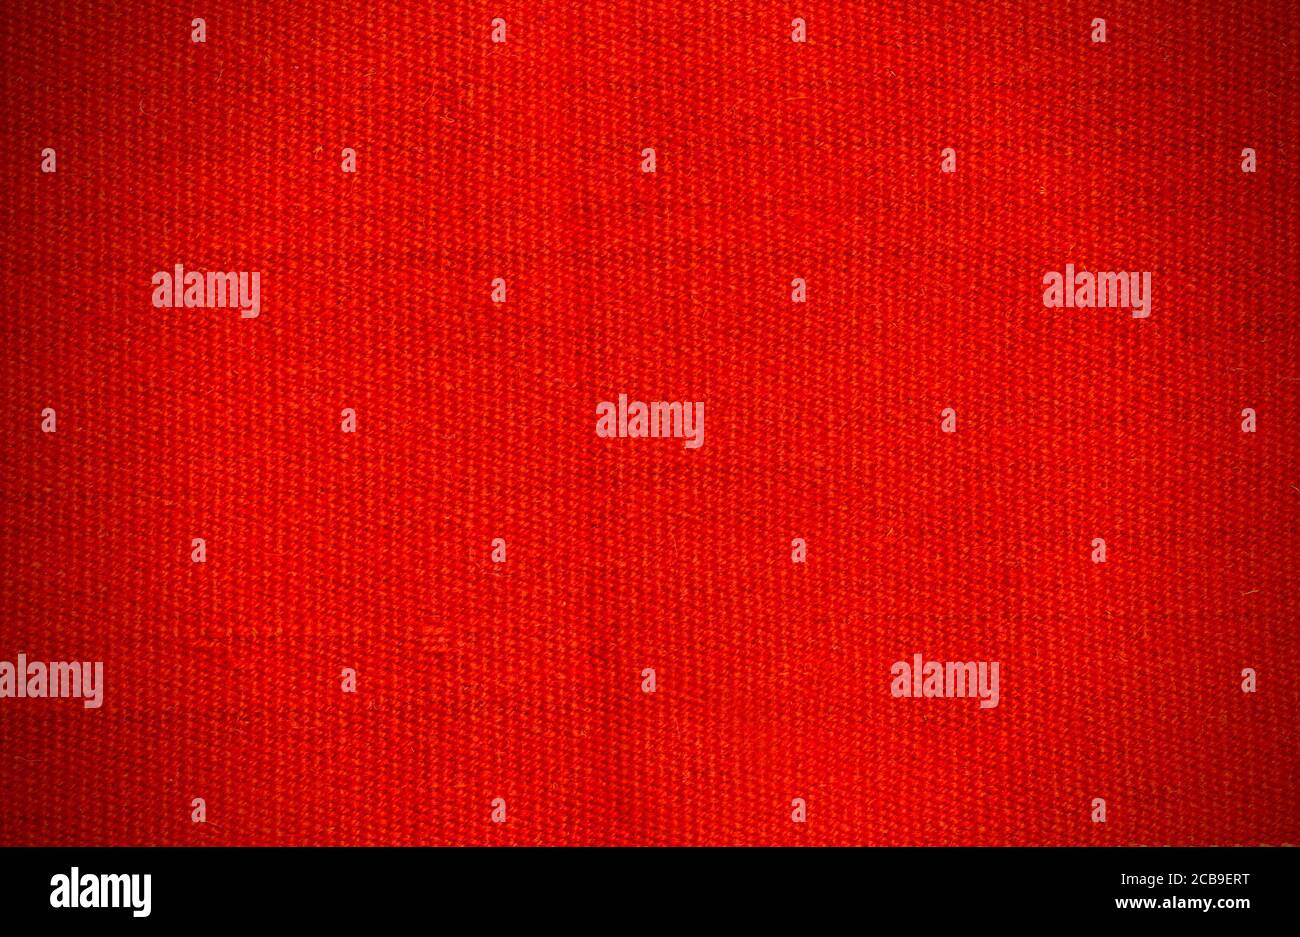 Natural red background of thick fabric. Fabric texture Stock Photo